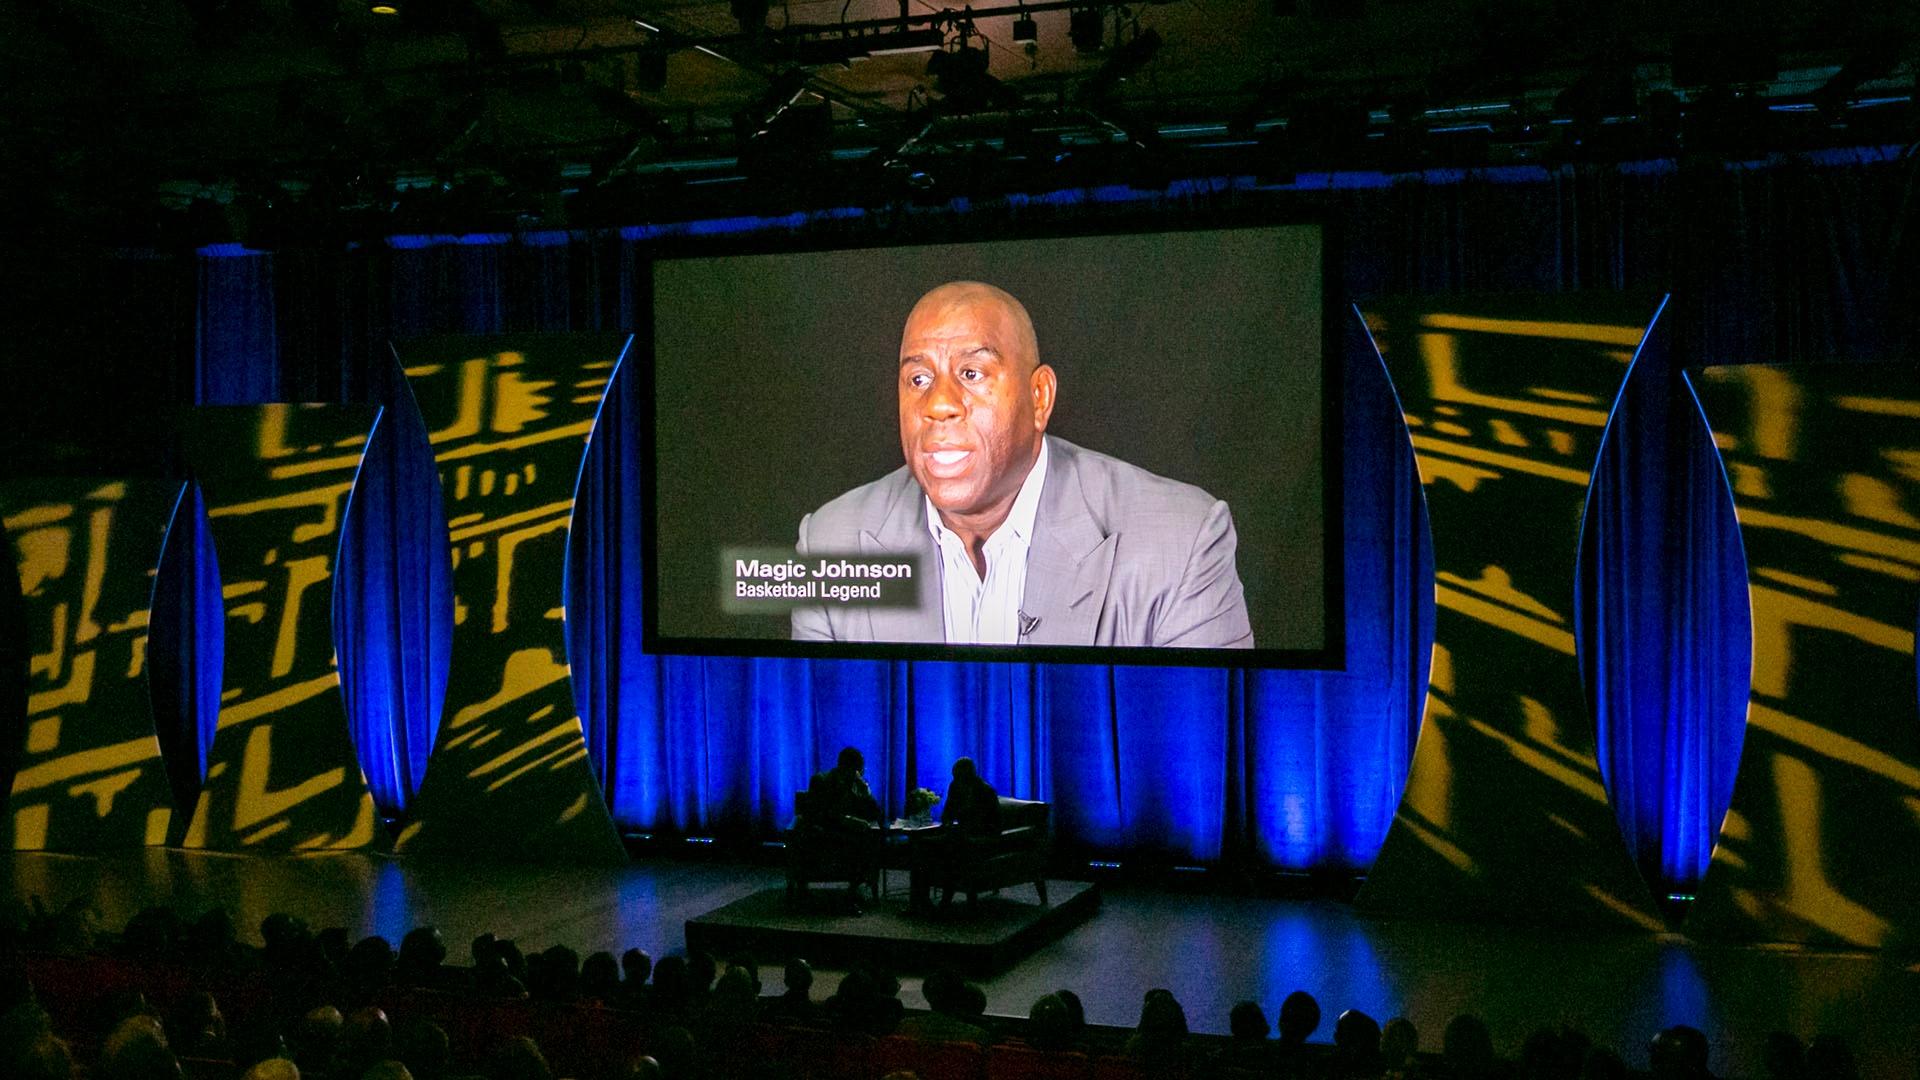 A video appearance from Earvin "Magic" Johnson Jr.